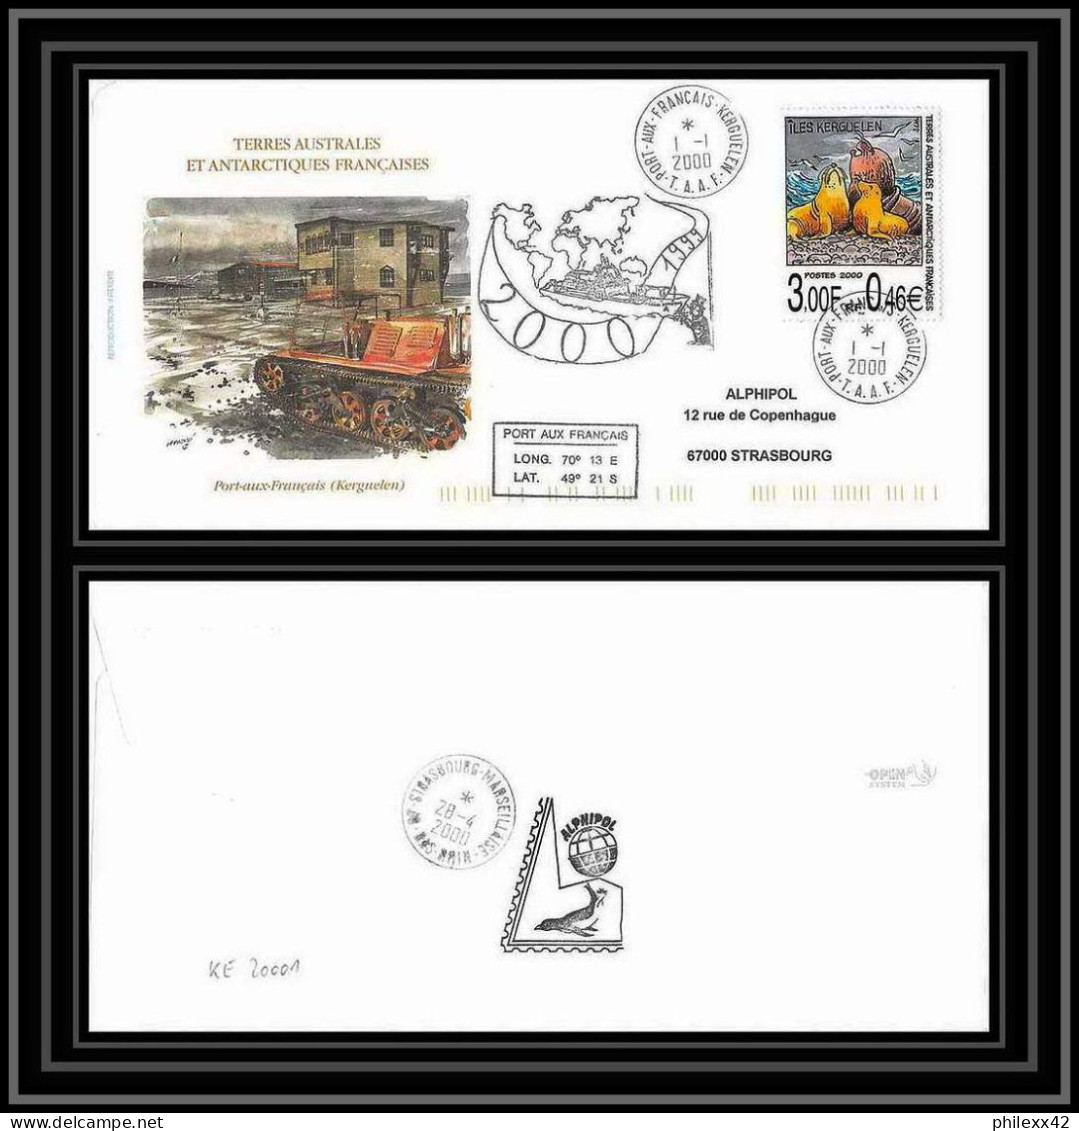 2370 ANTARCTIC Terres Australes TAAF Lettre Cover Dufresne 2 N°282 ALPIHOL 1/1/2000 - Covers & Documents